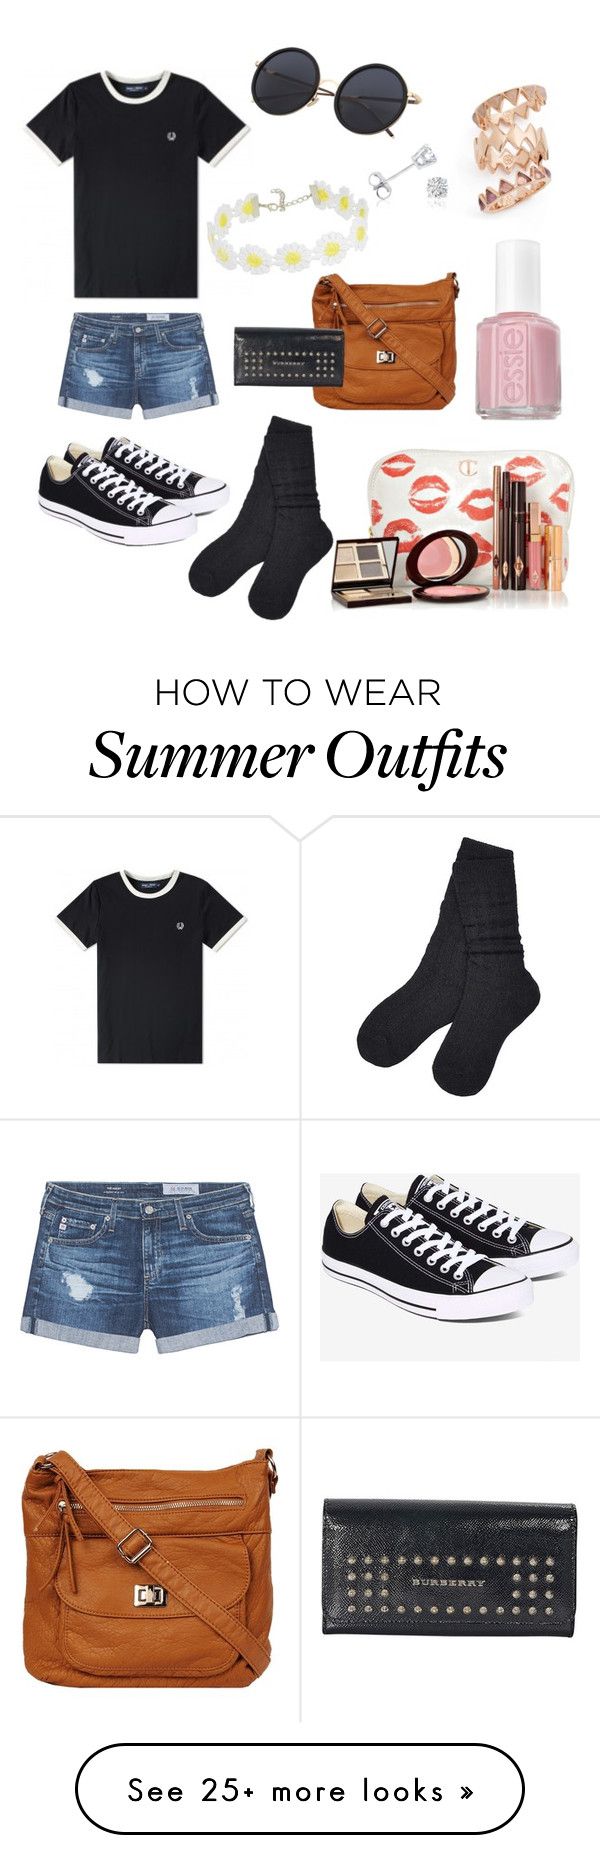 "Summer Outfit W/ Daisy Choker" by howdyingboo on Polyvore featuring F...